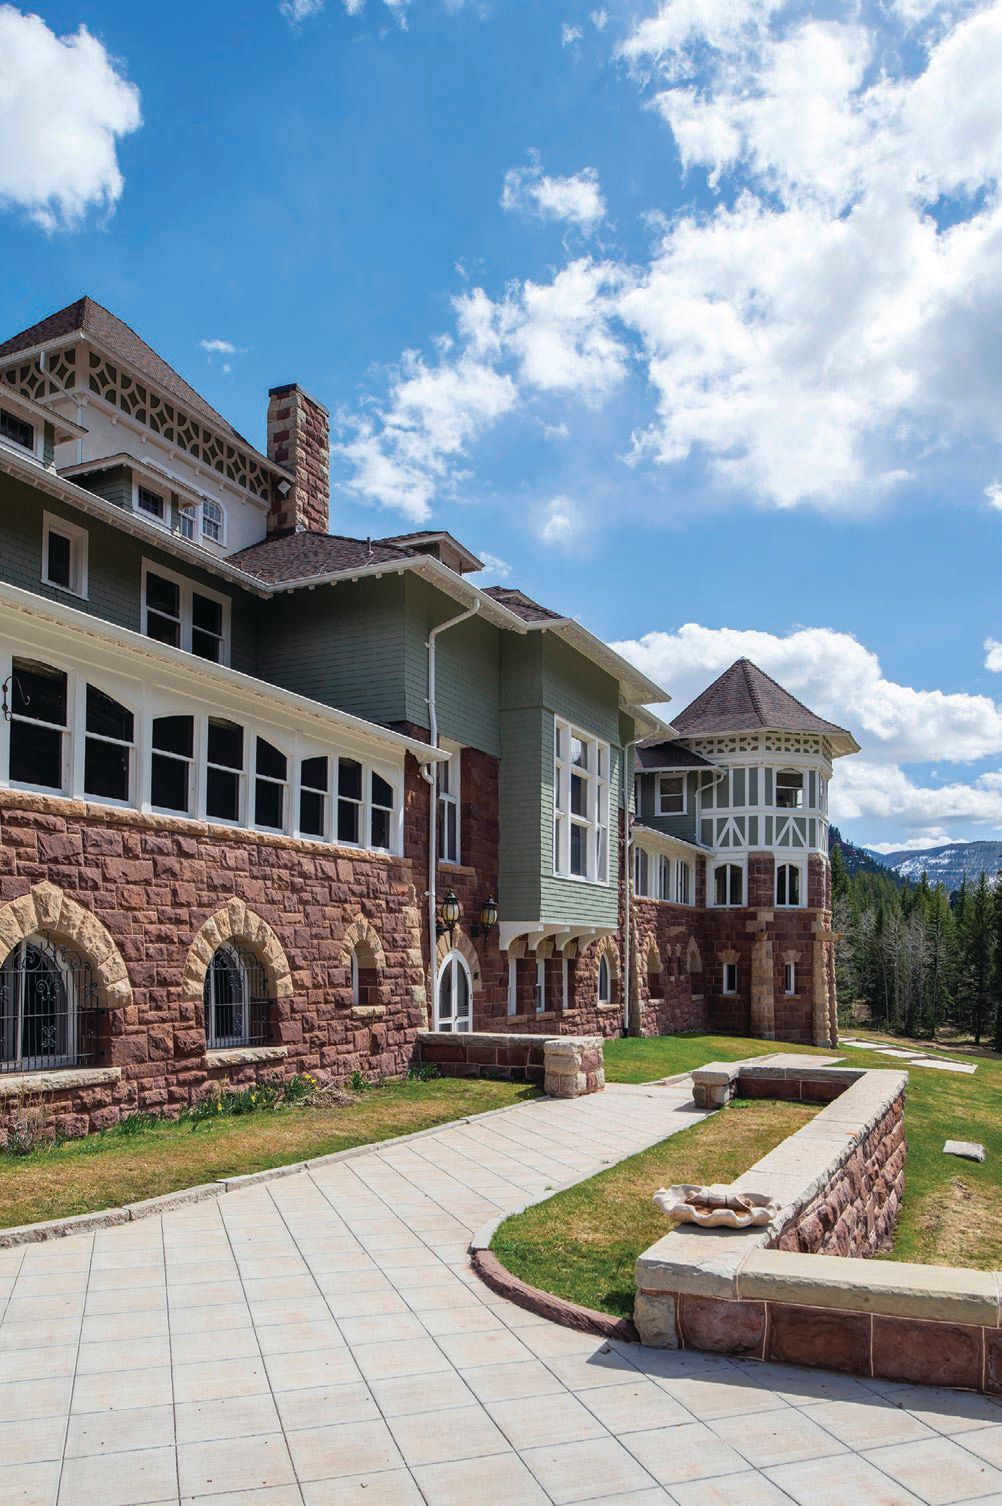 The Redstone Castle is located about 40 miles outside of Aspen PHOTOGRAPHED BY DANIEL BAYER